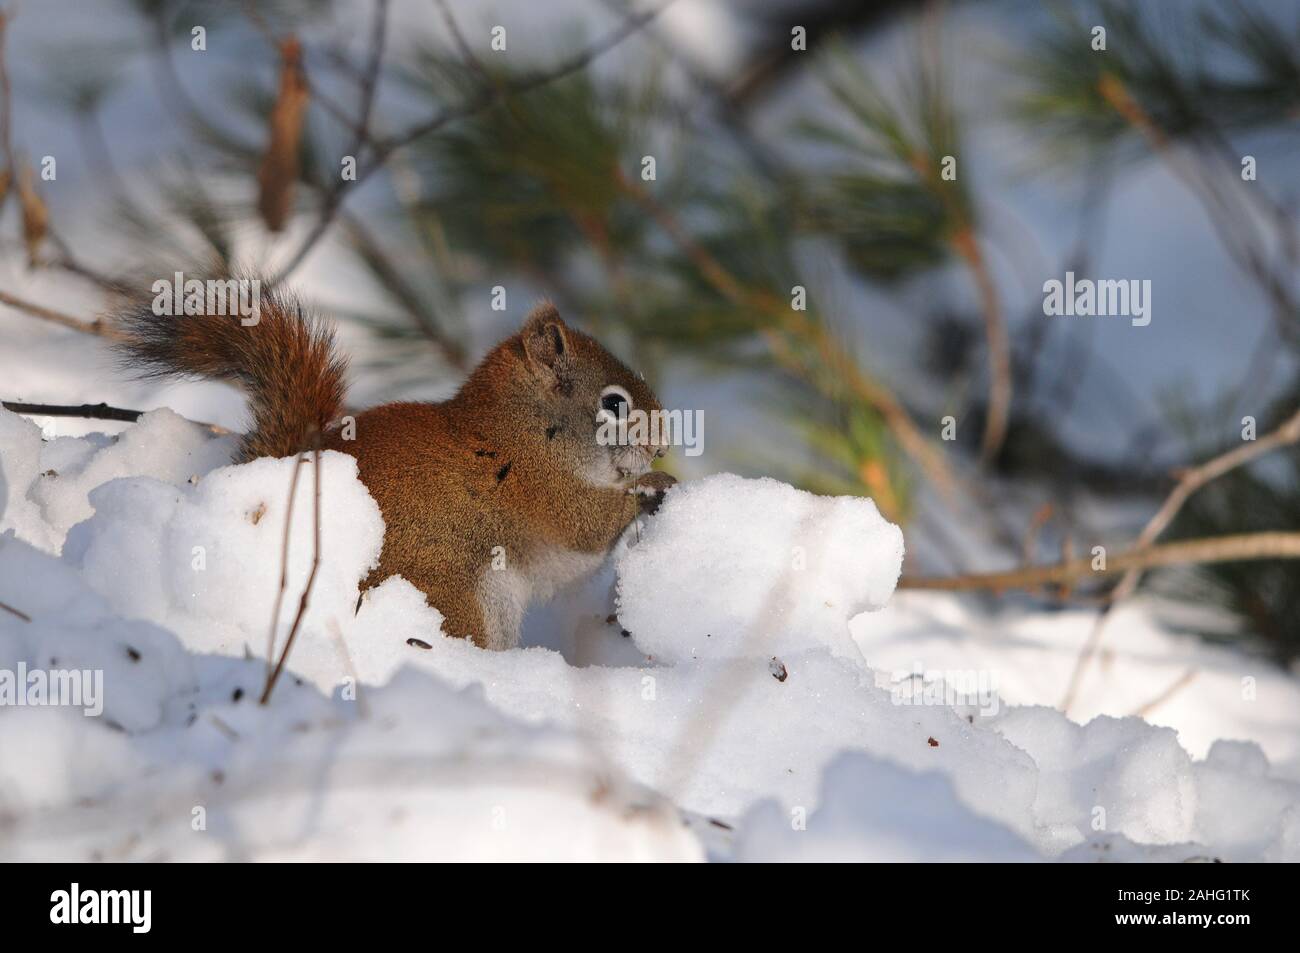 Squirrel animal in the forest sitting in the snow with bokeh background displaying its brown fur, head, eyes, nose, ears, paws in its surrounding and Stock Photo